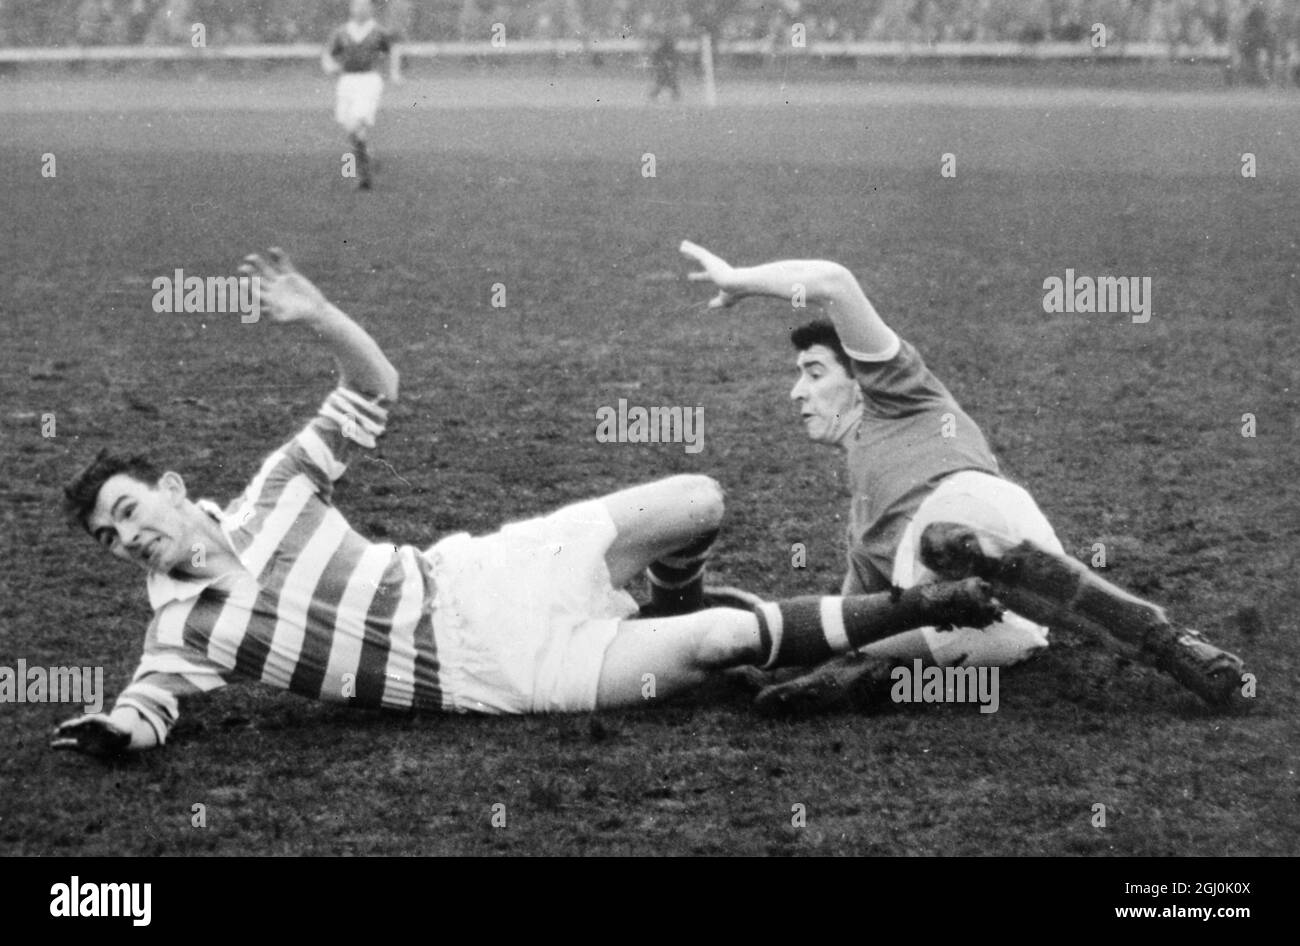 Glasgow: In the match between Celtic and Kilmanock here, Beattie of Kilmanock and Peacock of Celtic strike a ''Ballet Pose'' as they hit the ground. During a scrummage outside the Celtic goalmouth. 12 December 1955 Stock Photo